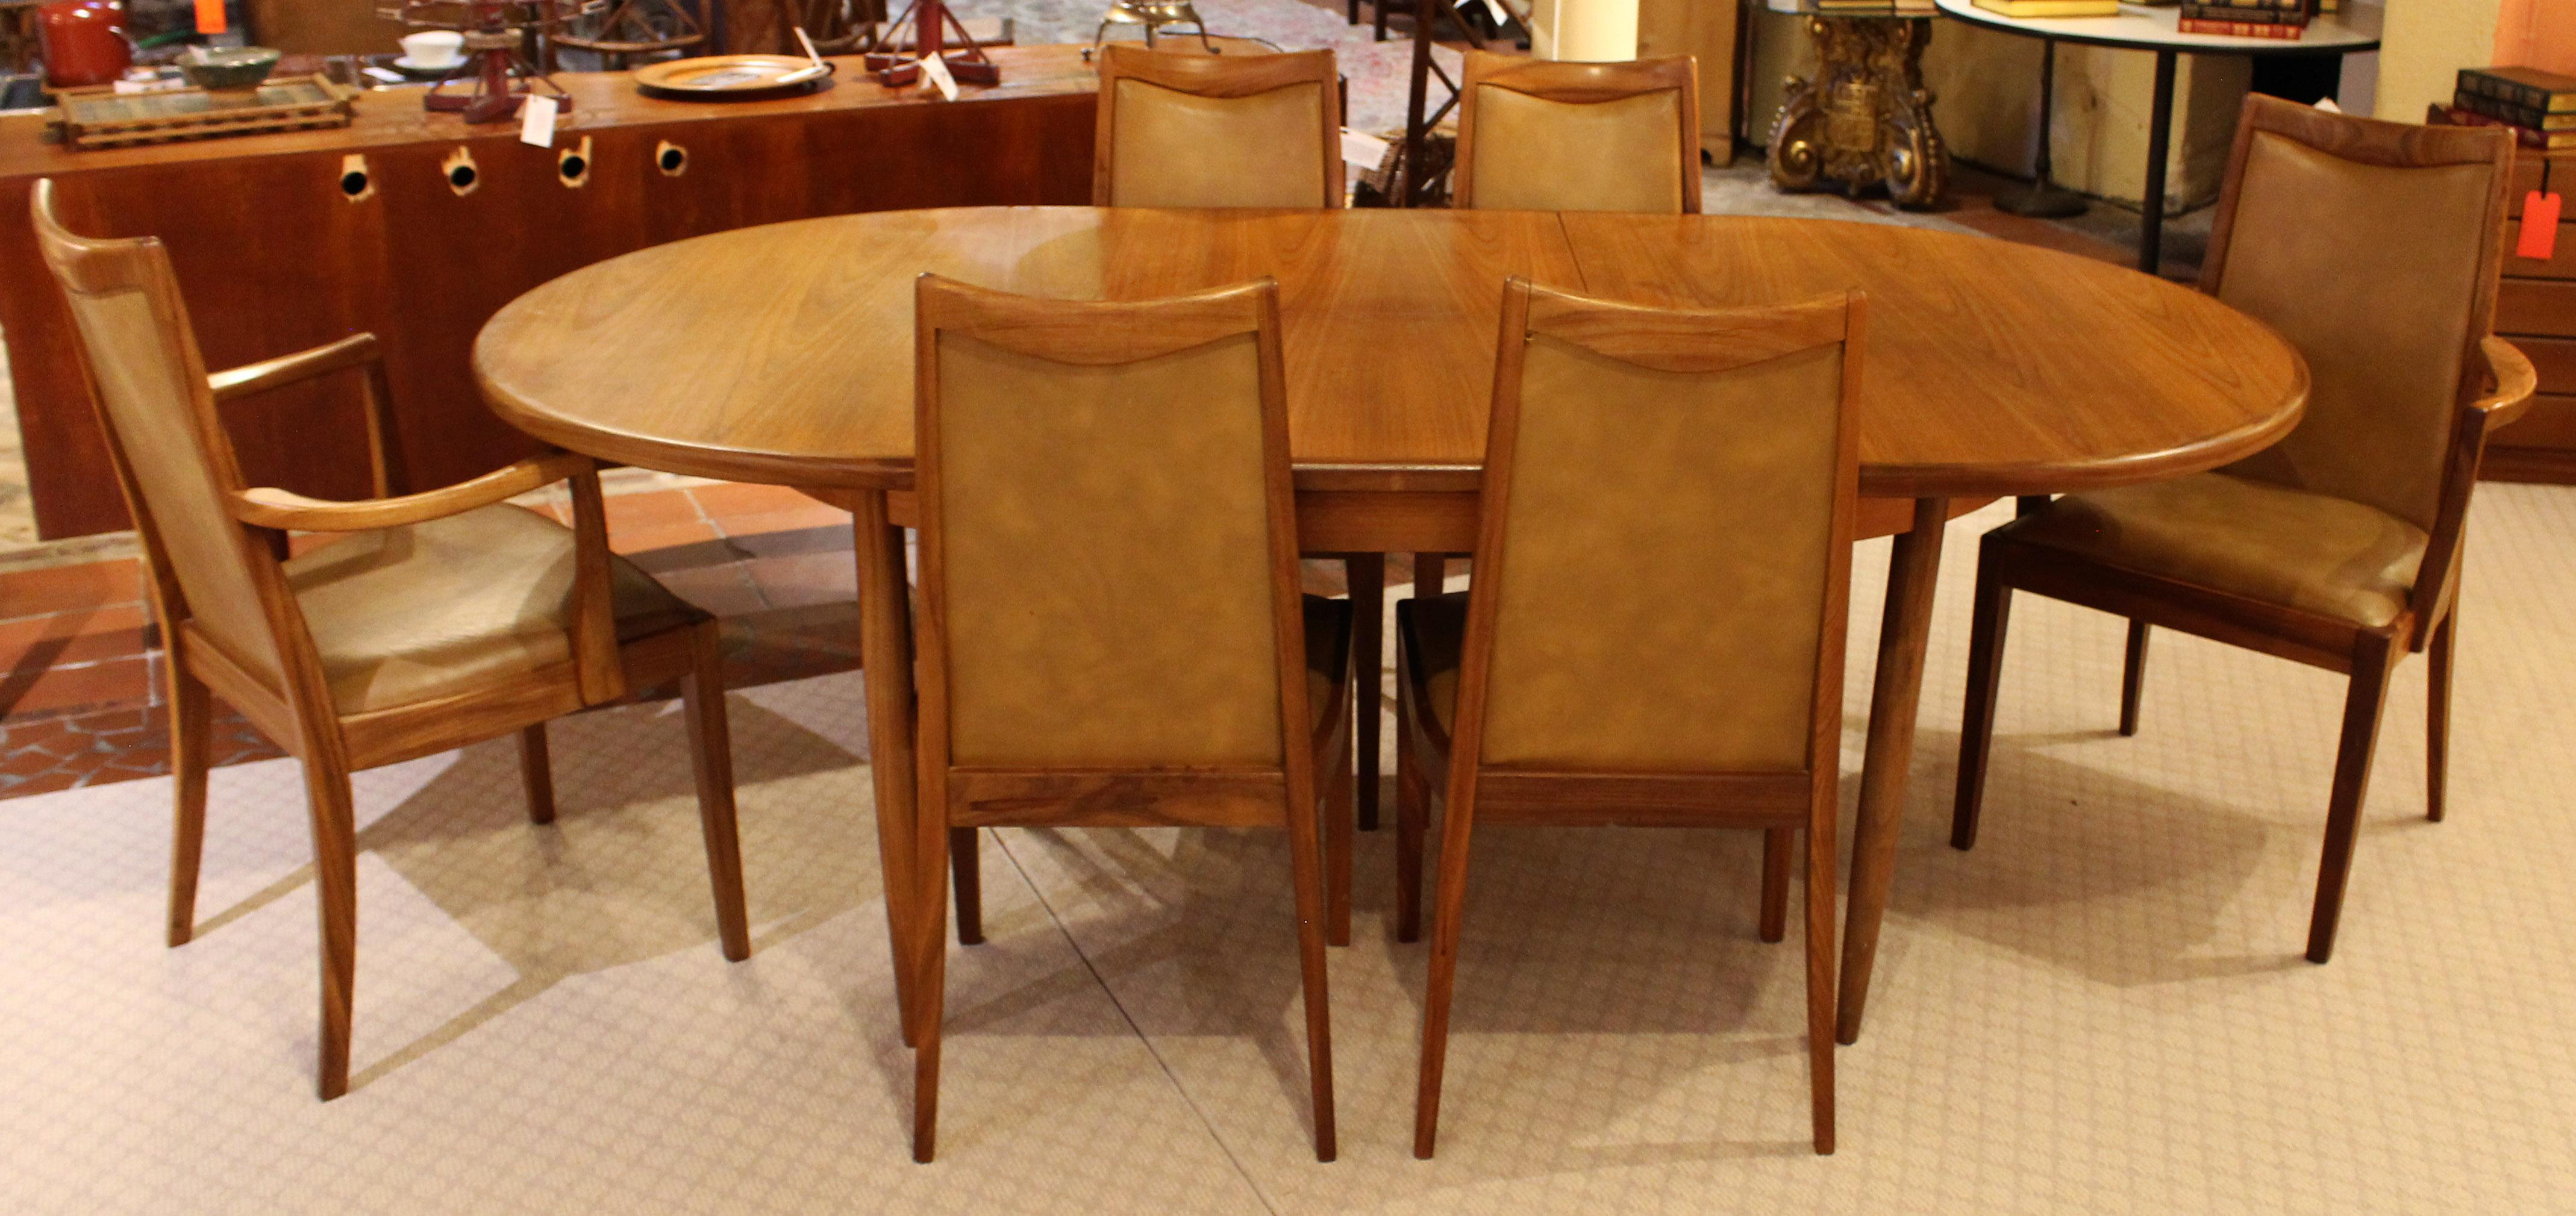 Fine and sculptural Mid-Century Modern dining table and six chairs set (including two armchairs). G Plan. Circa 1960s. Teak and teak veneered. Table with butterfly leaf extension. Table: 44